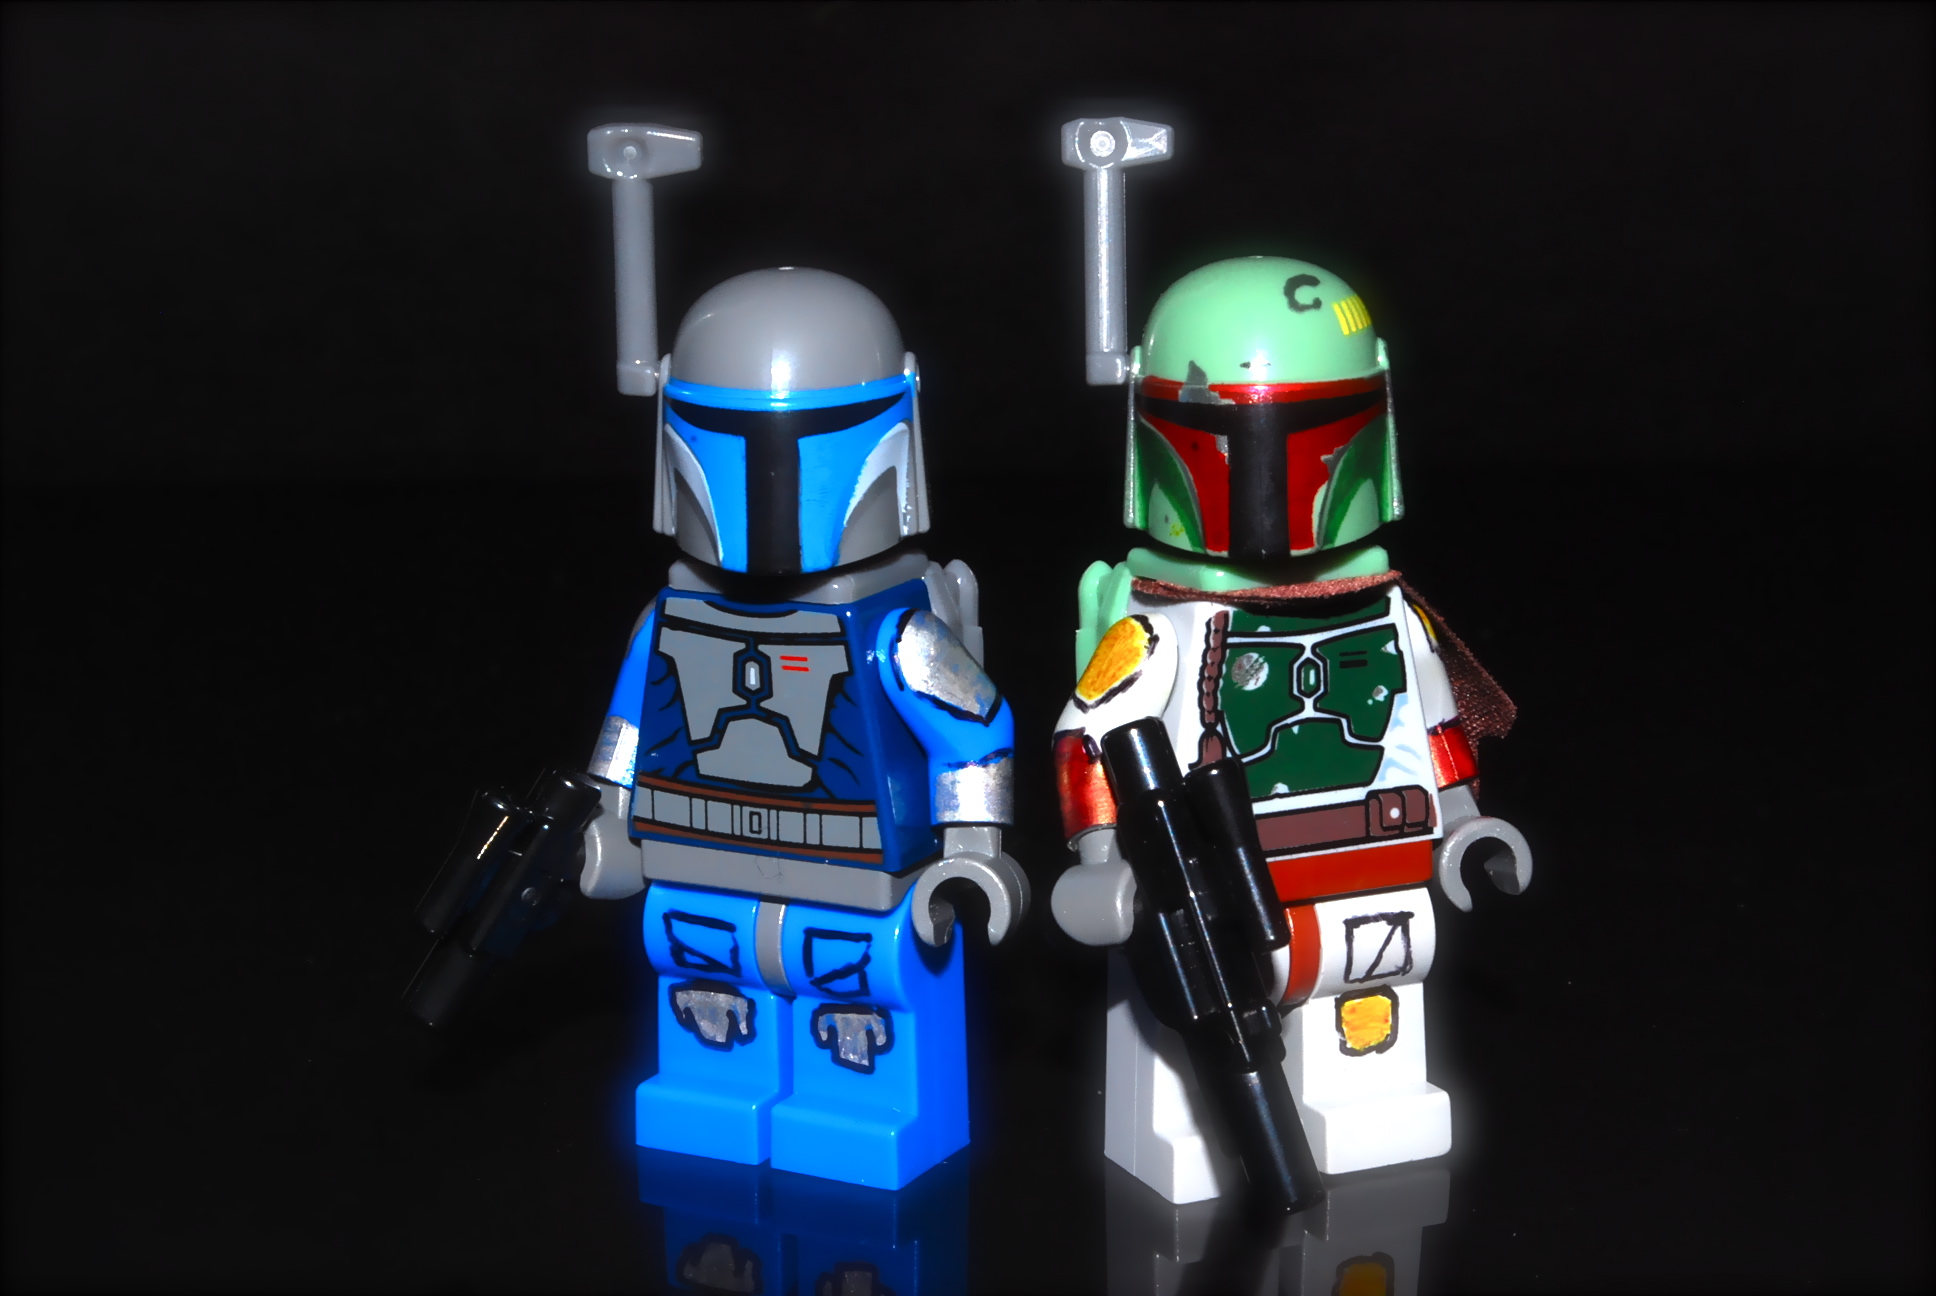 Wallpaper robot space LEGO armor Toy hunters prototypes 1936x1296